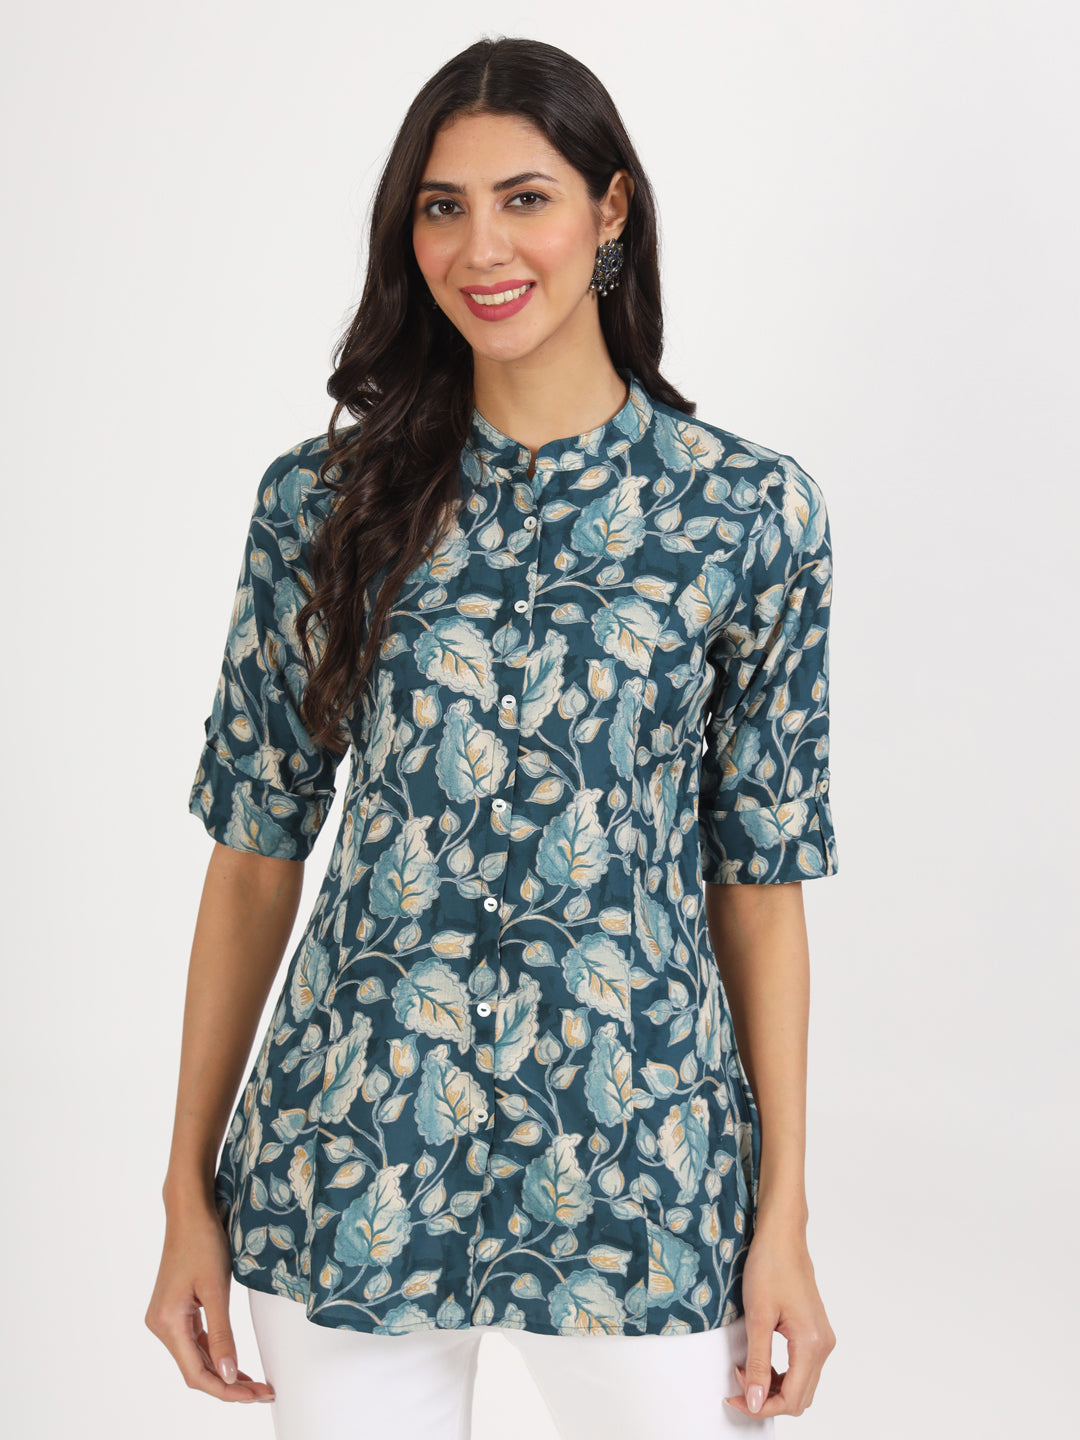 Bottle Green Floral Printed Rayon Top